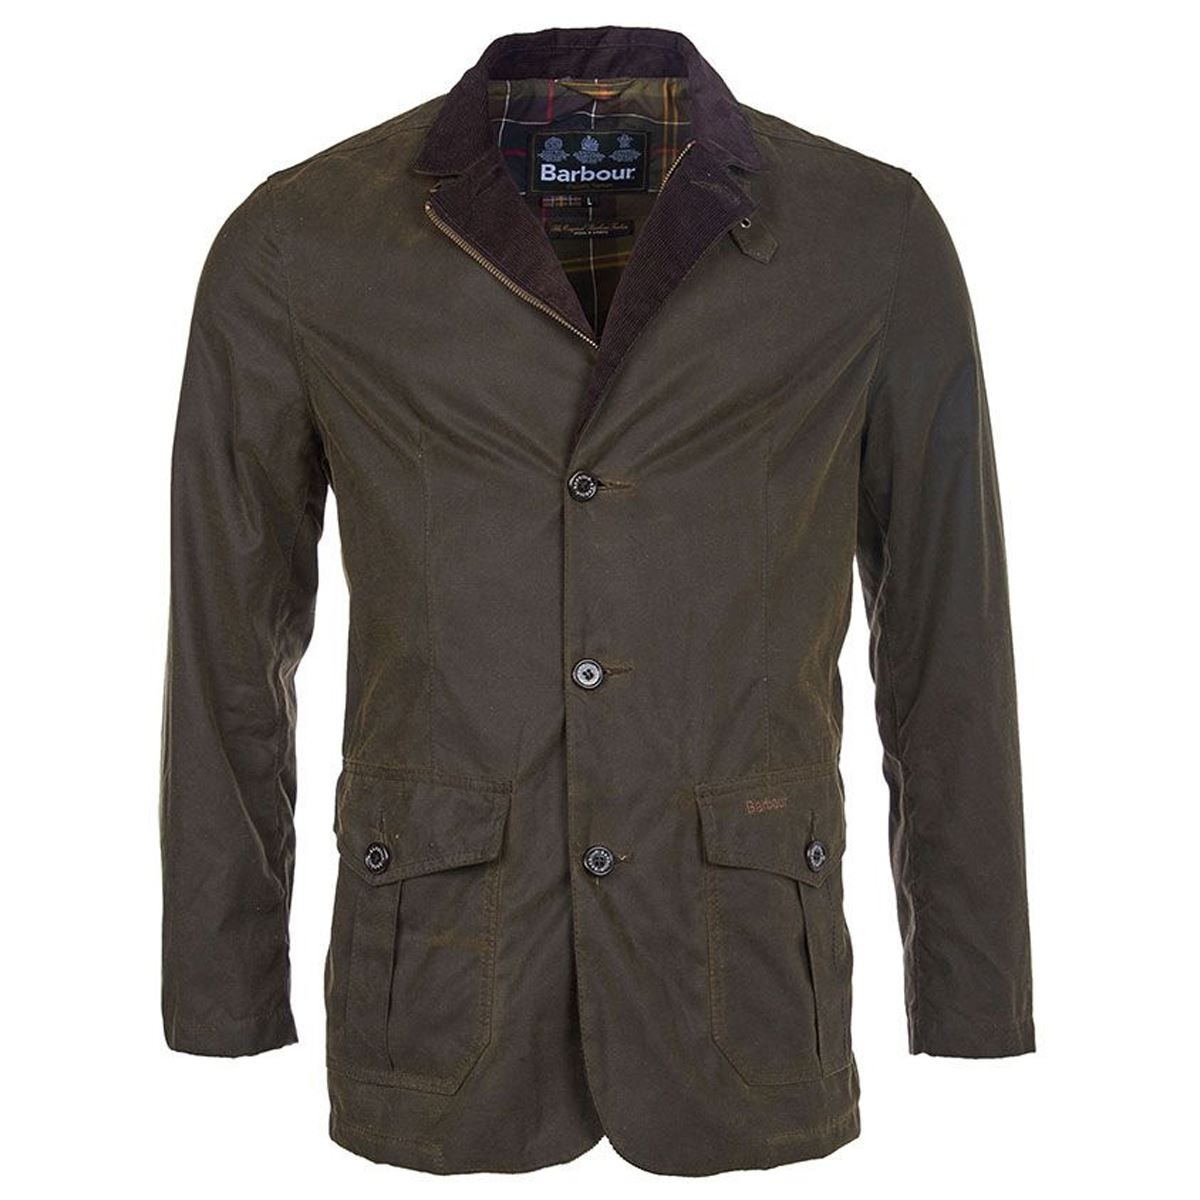 What material lines the Barbour Lutz Wax Jacket?